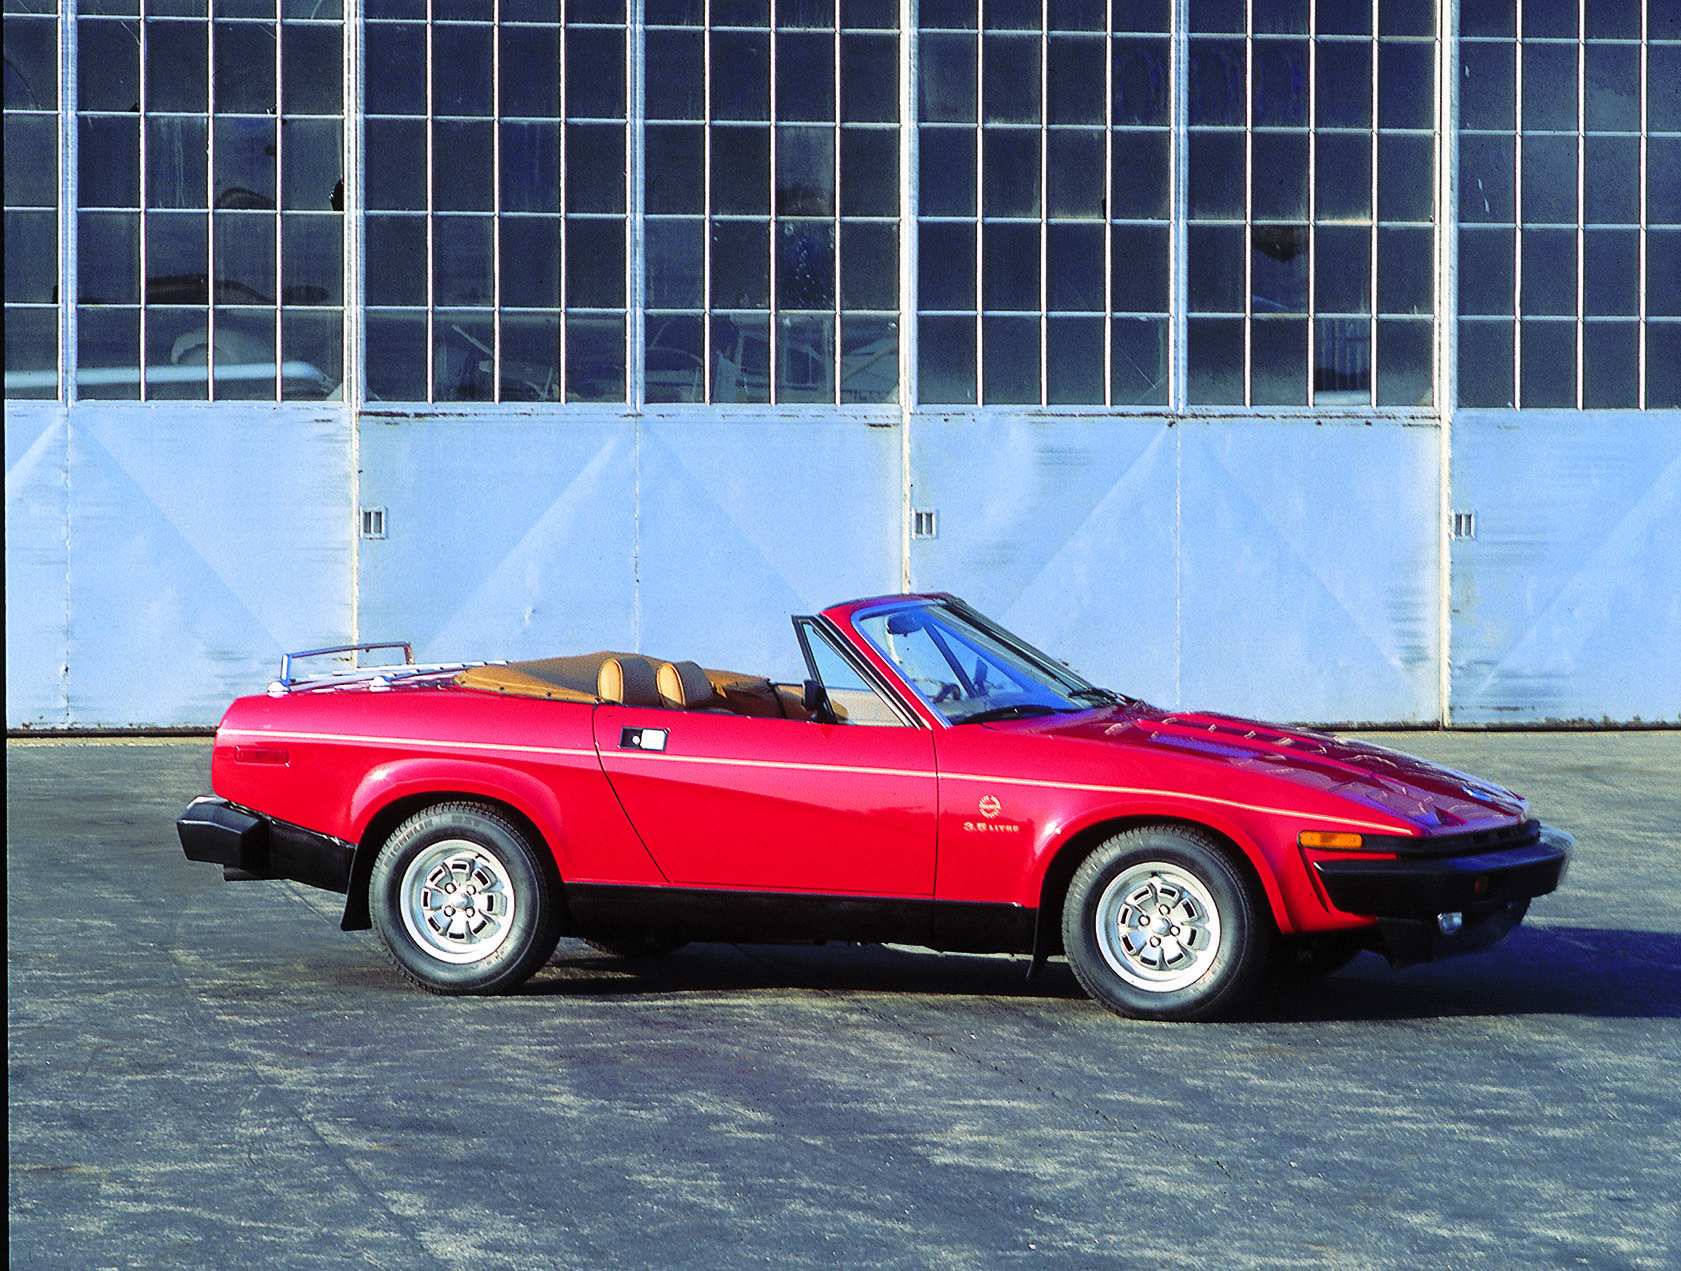 The Triumph TR8 May Not Be A Bargain Forever